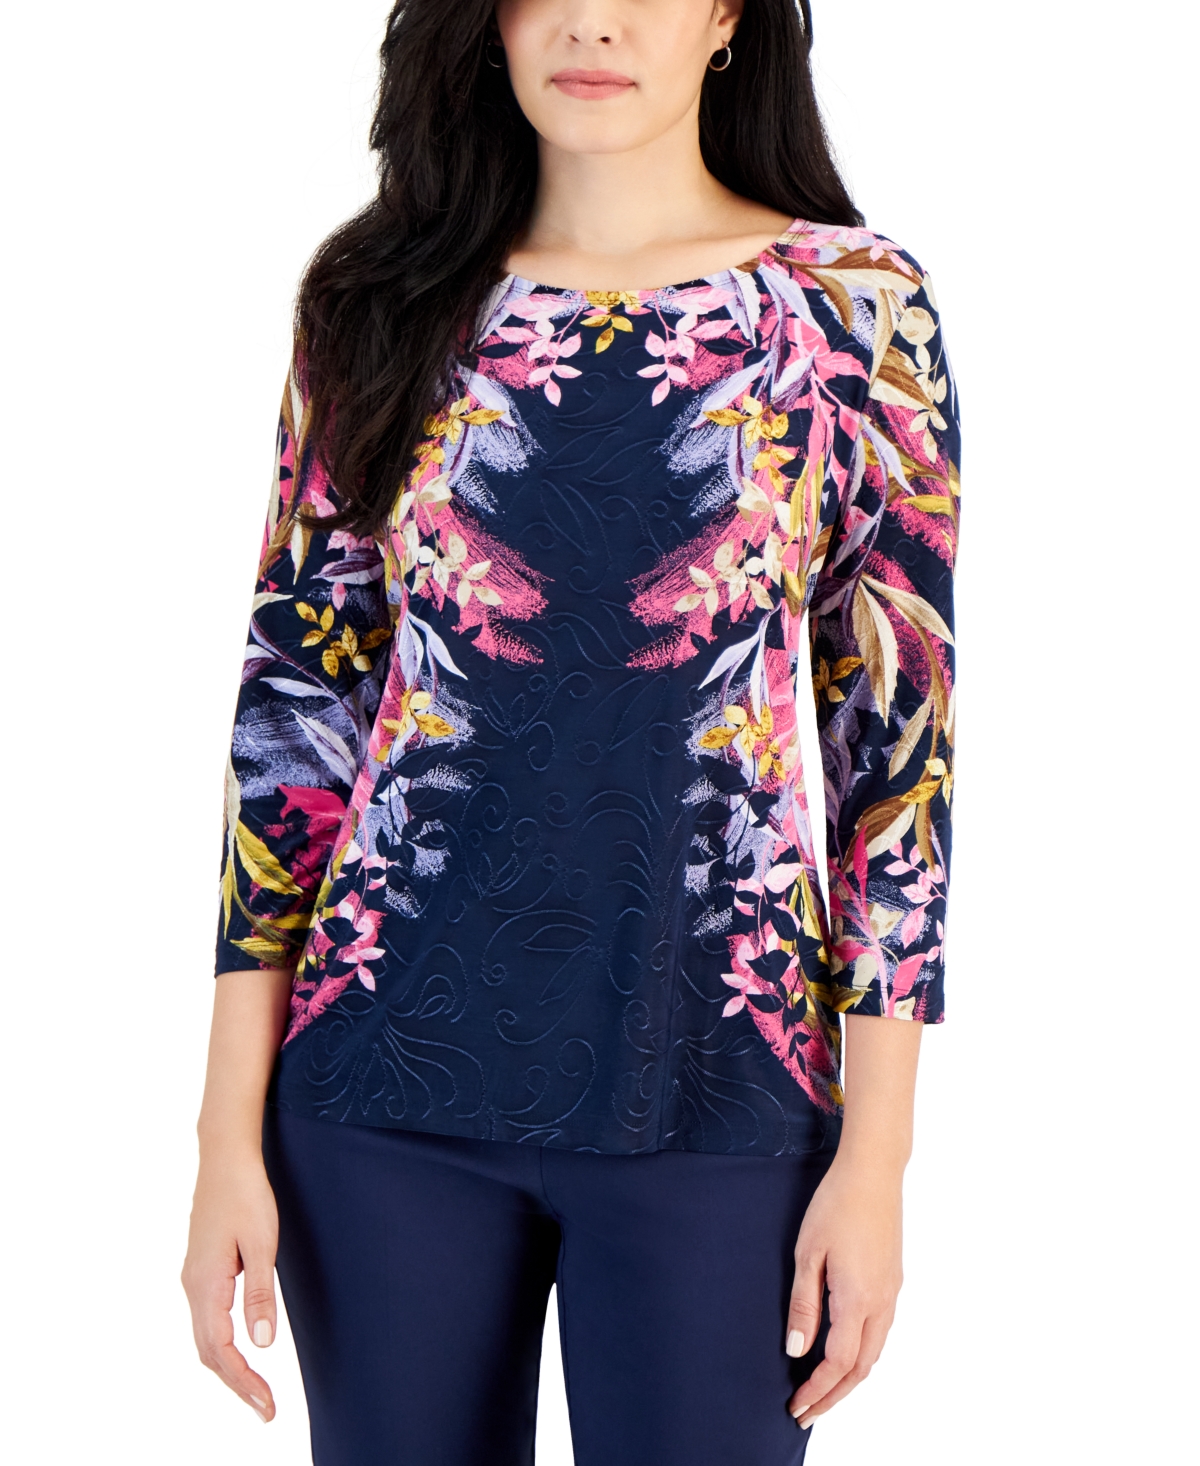 Women's Printed 3/4 Sleeve Jacquard Top, Created for Macy's - Intrepid Blue Combo